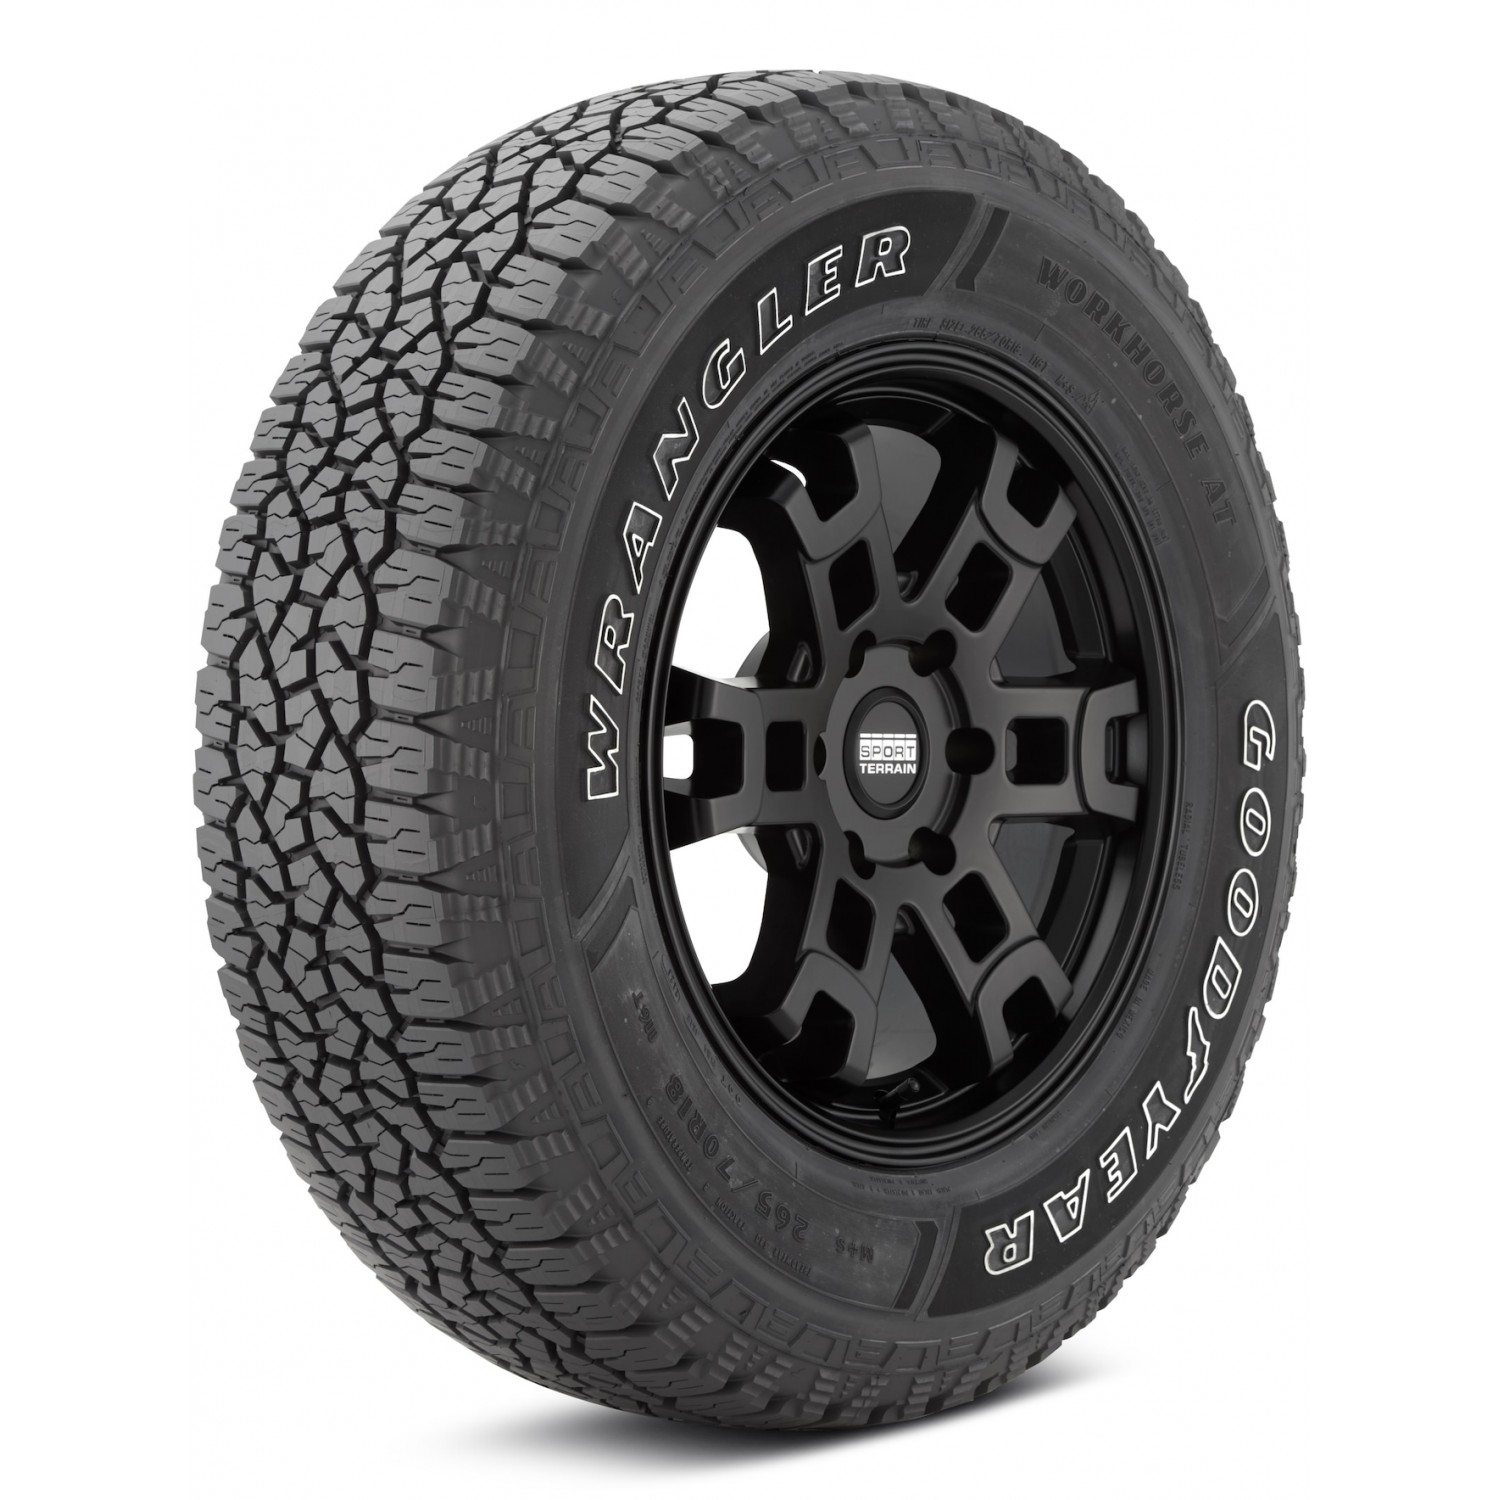 Goodyear Wrangler Workhorse AT Outlined White Letters Tire (245/70R16 107T)  vzn121387